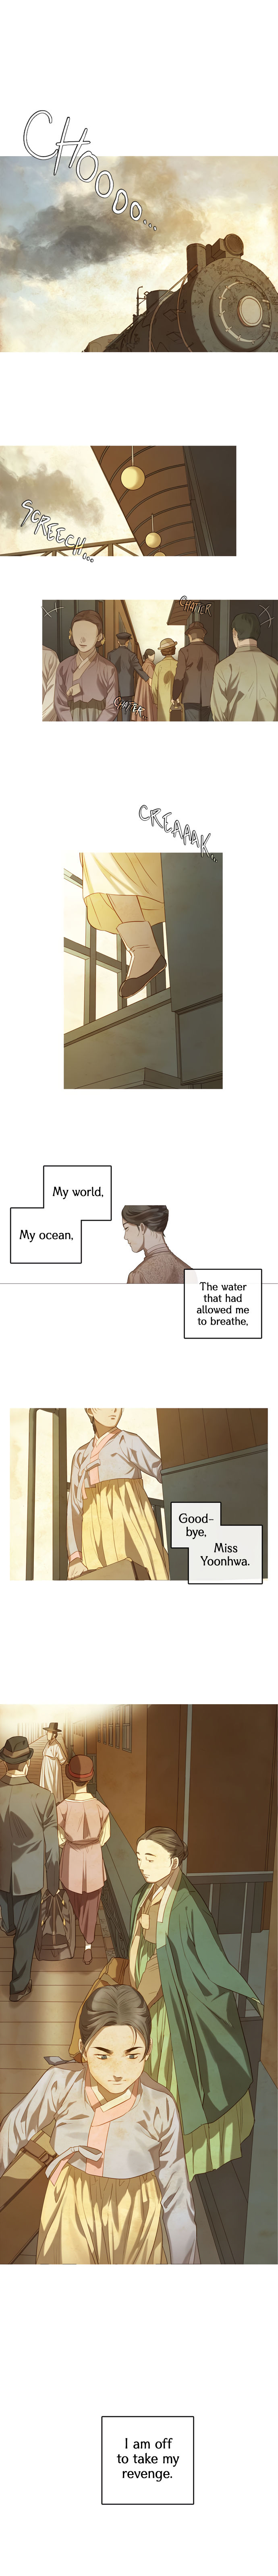 The Whale Star - The Gyeongseong Mermaid - Chapter 15 Page 1